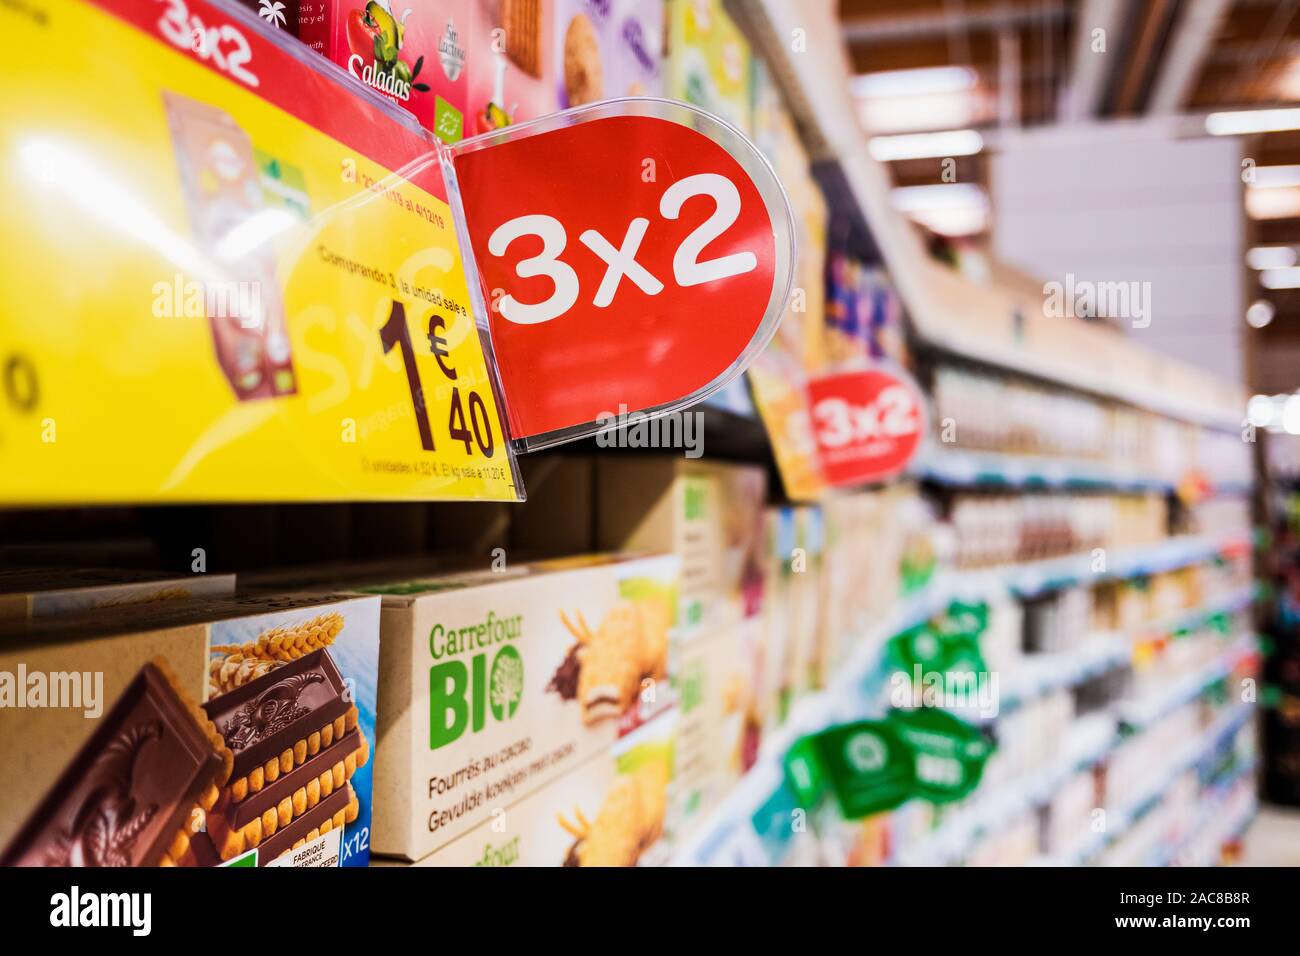 Valencia, Spain - November 26, 2019: Carrefour makes periodic offers  offering organic products at 3x2 price Stock Photo - Alamy